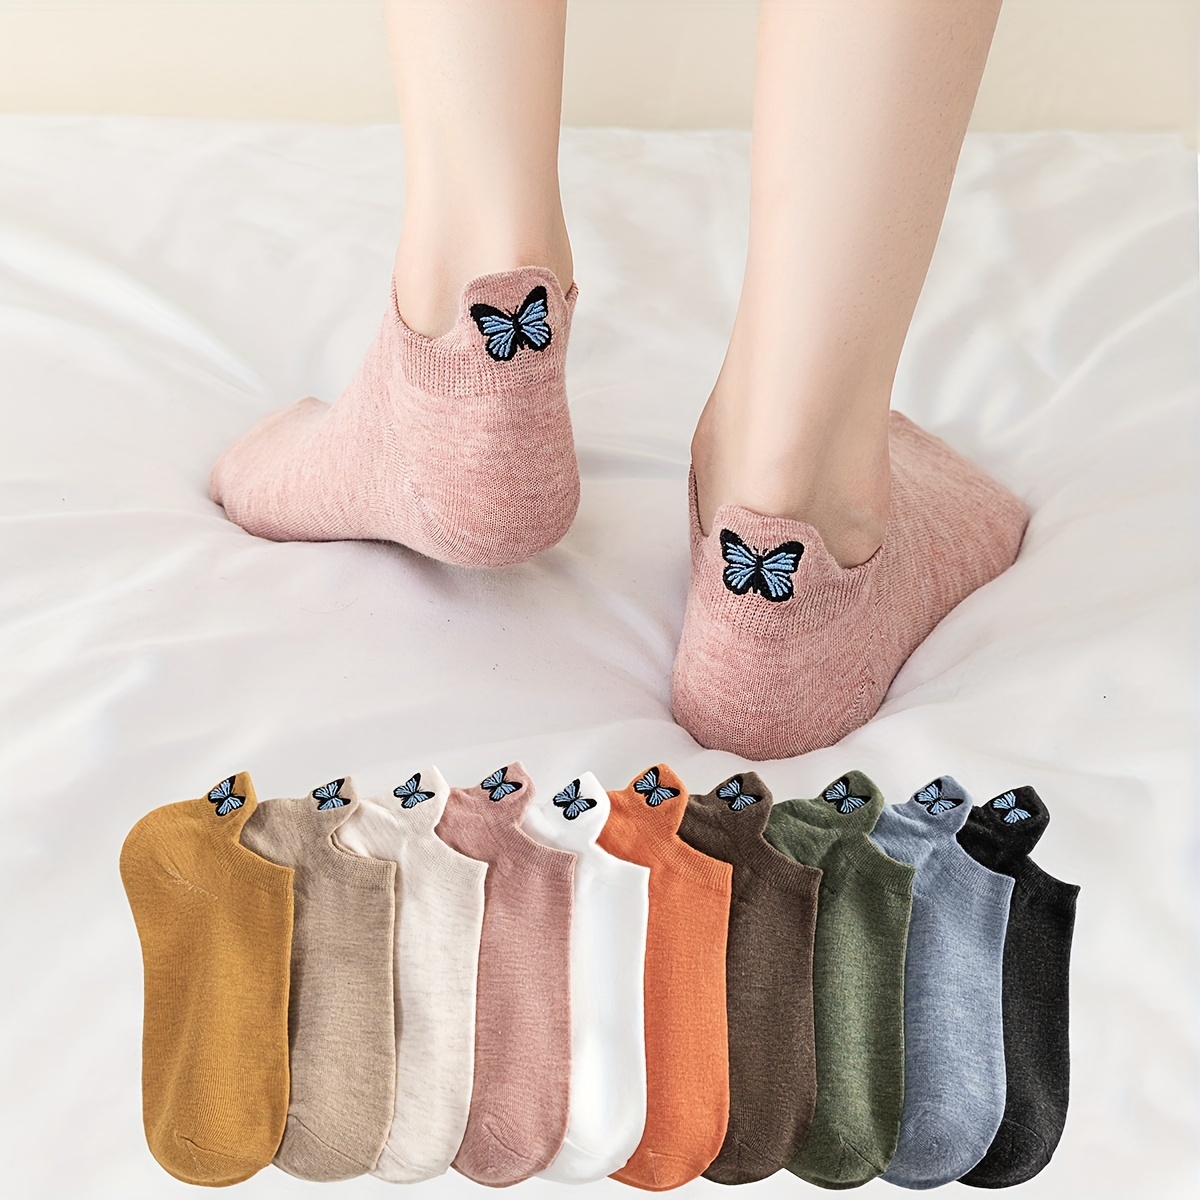 

10 Pairs Butterfly Embroidery Socks, Casual & Breathable No Show Socks, Women's Stockings & Hosiery